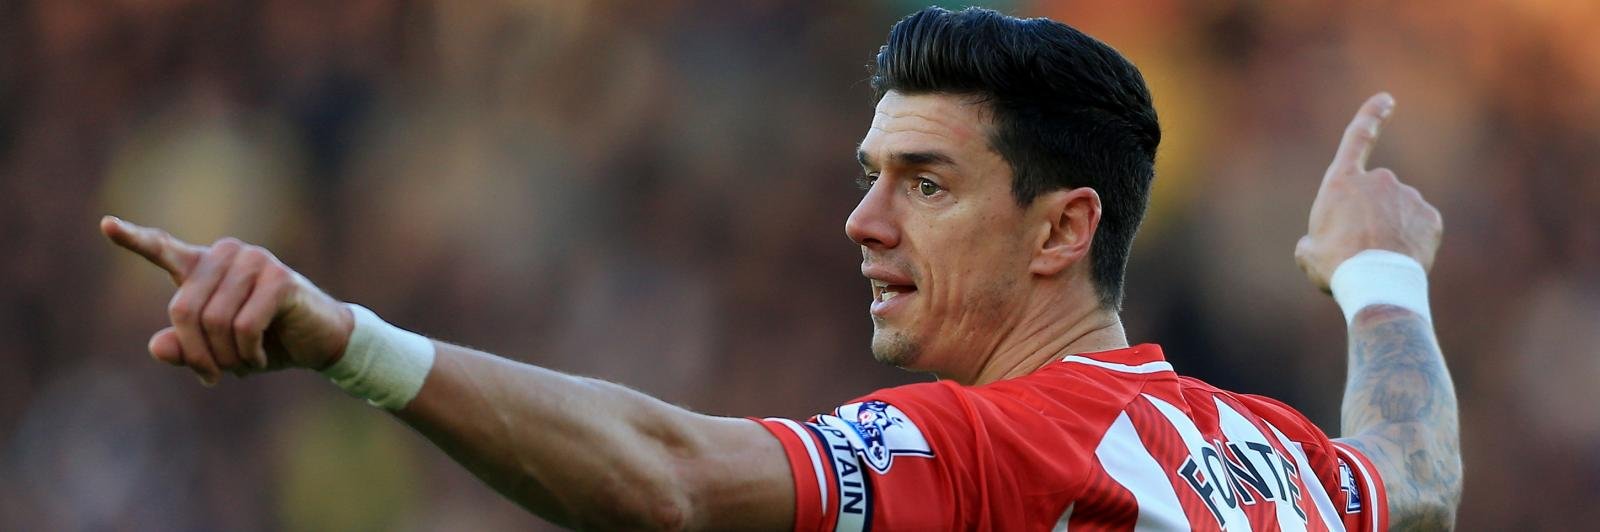 Portugal’s Cristiano Ronaldo will hog the limelight, but Jose Fonte’s rise is remarkable